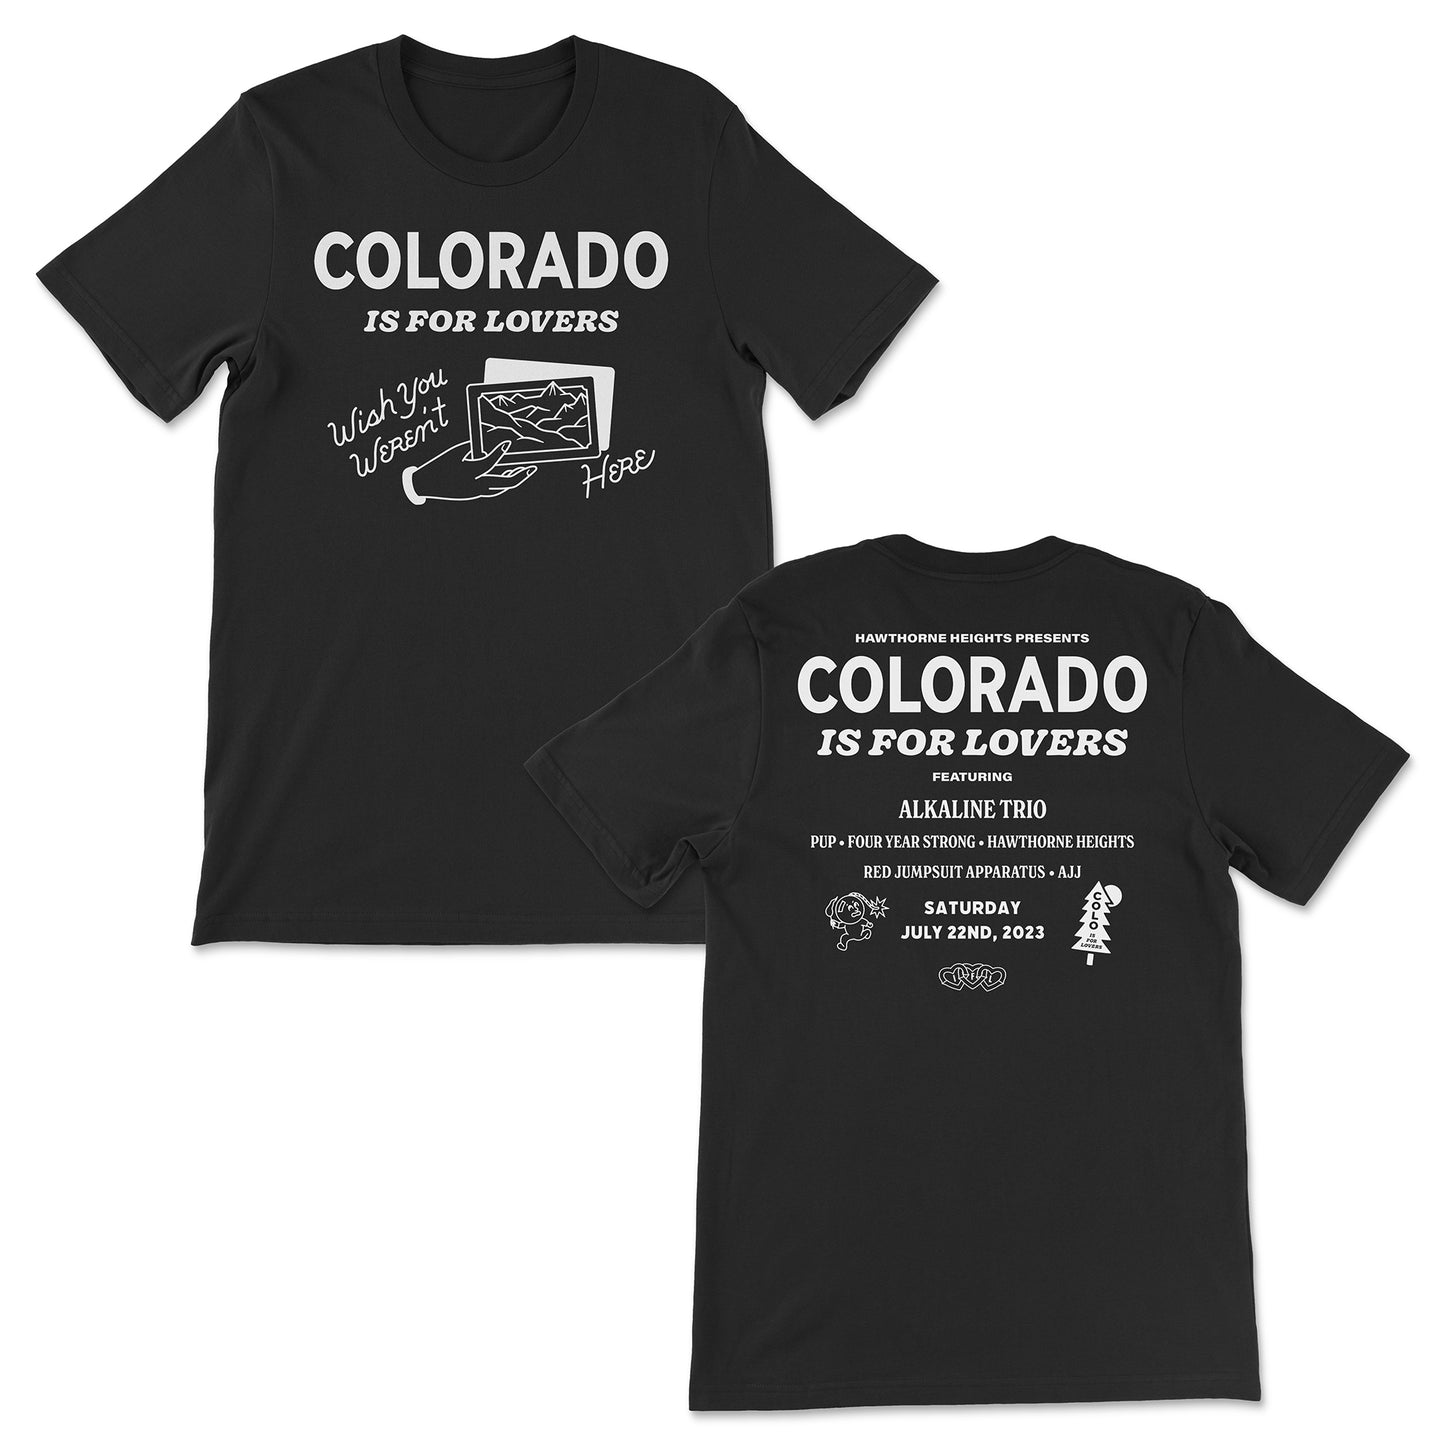 COLORADO Is For Lovers Festival Tee Shirt w/ STICKER SHEET